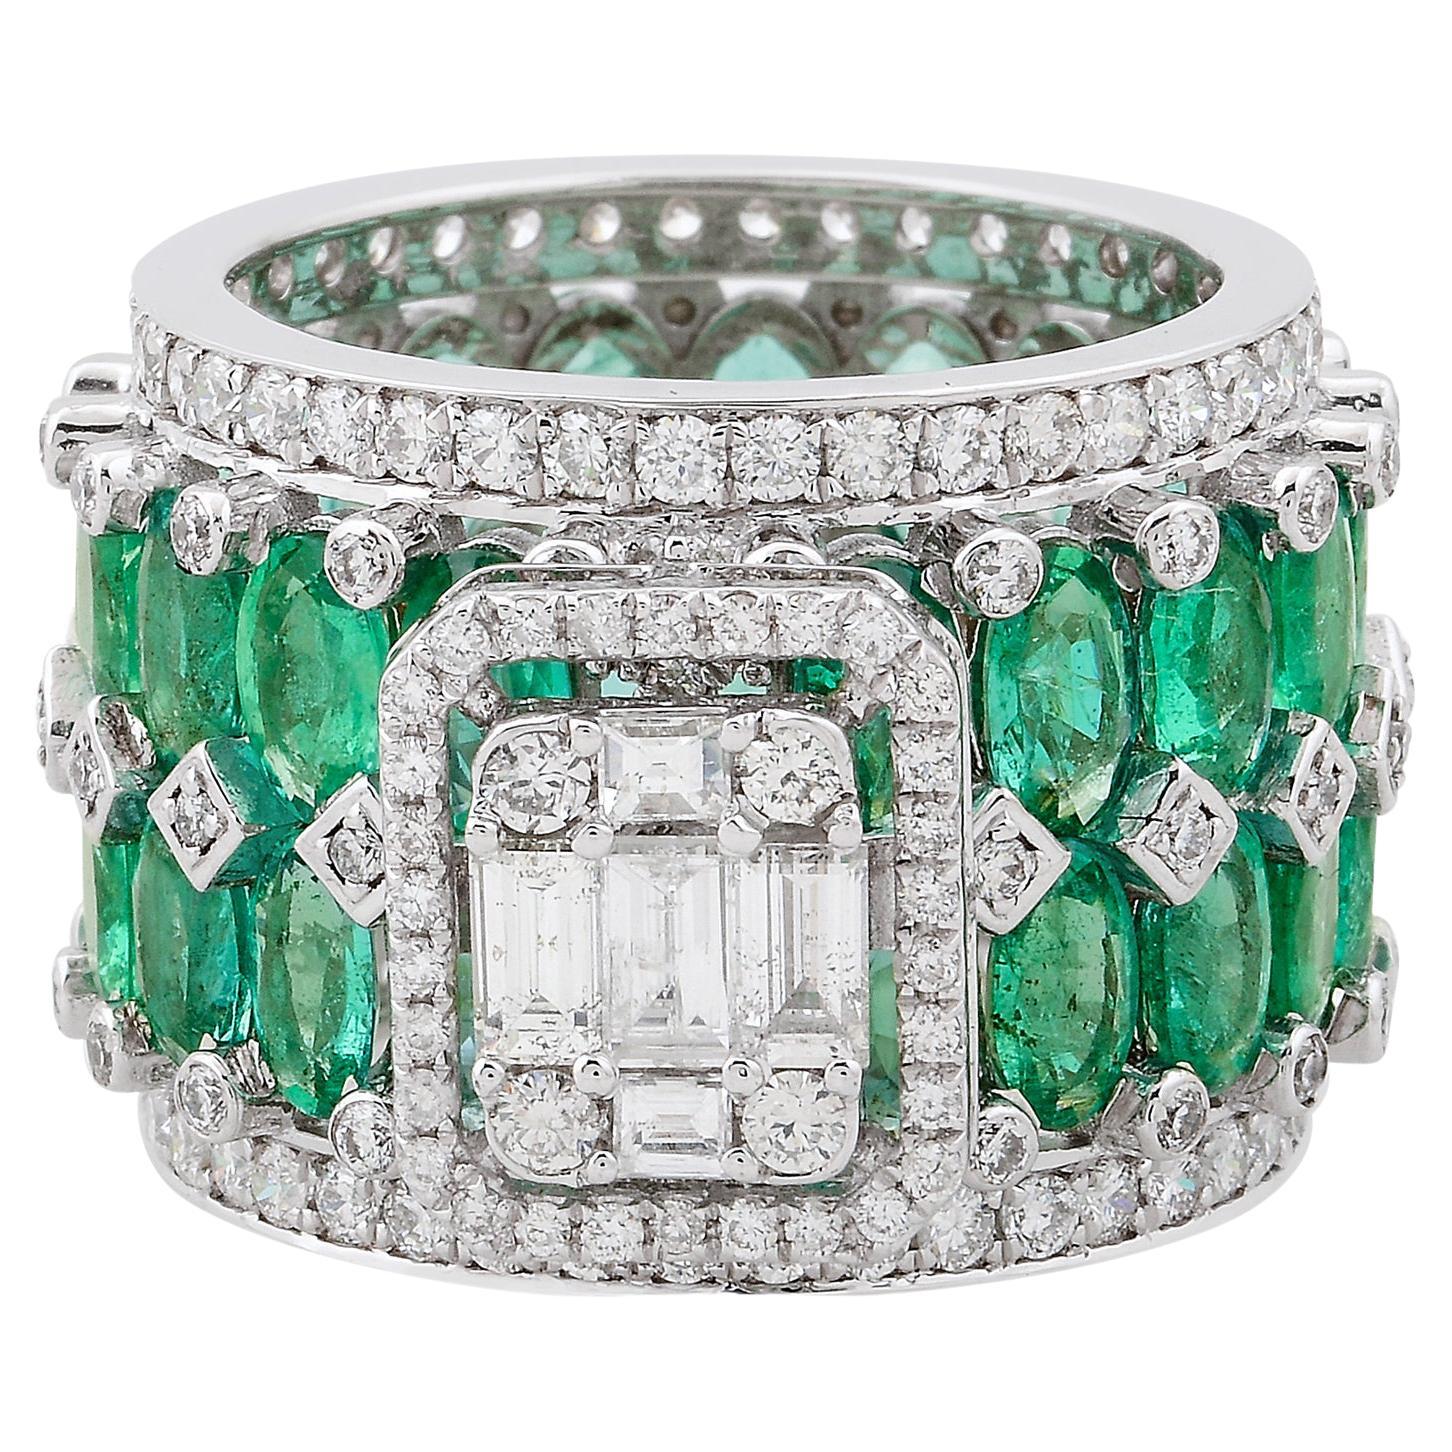 Oval Natural Emerald Gemstone Band Ring Baguette Diamond 18k White Gold Jewelry